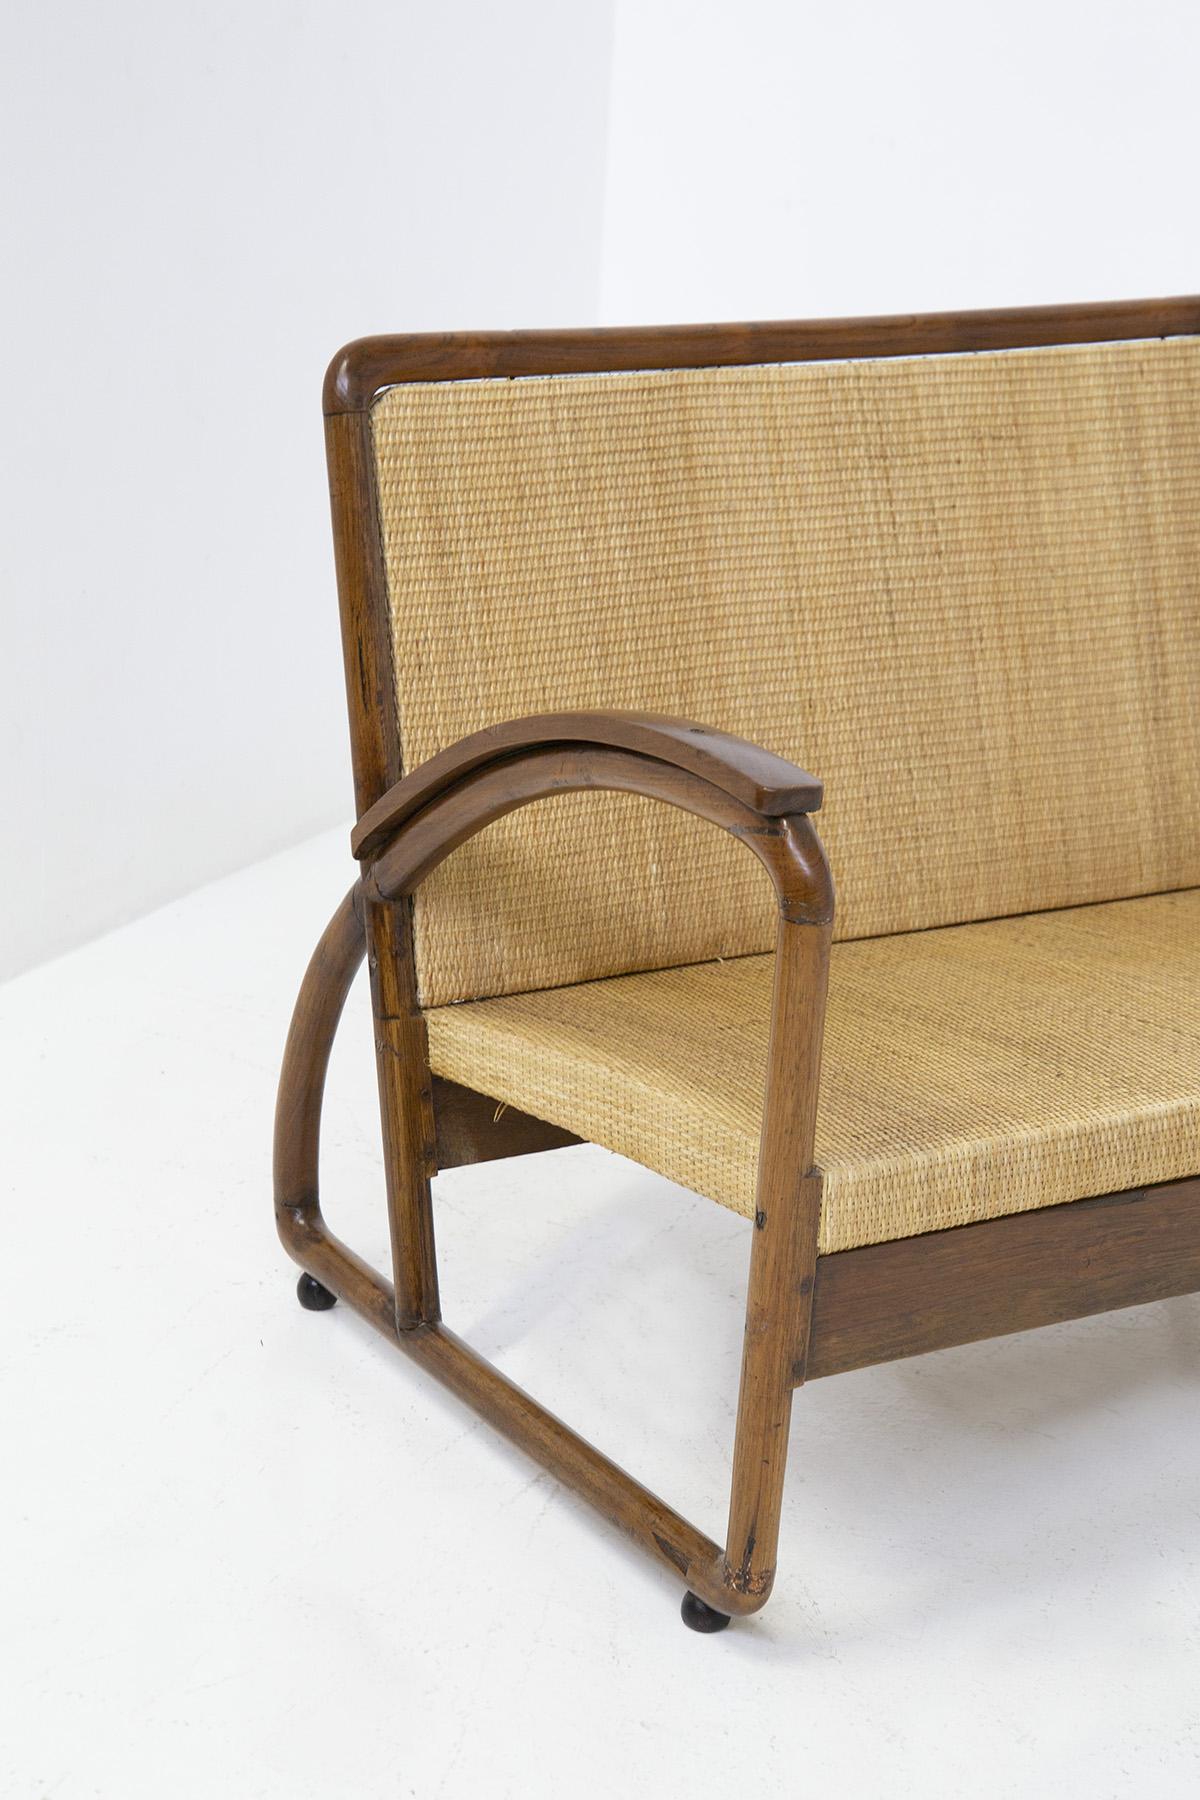 Art Deco Italian Rationalist Loveseat in Wood and Rattan For Sale